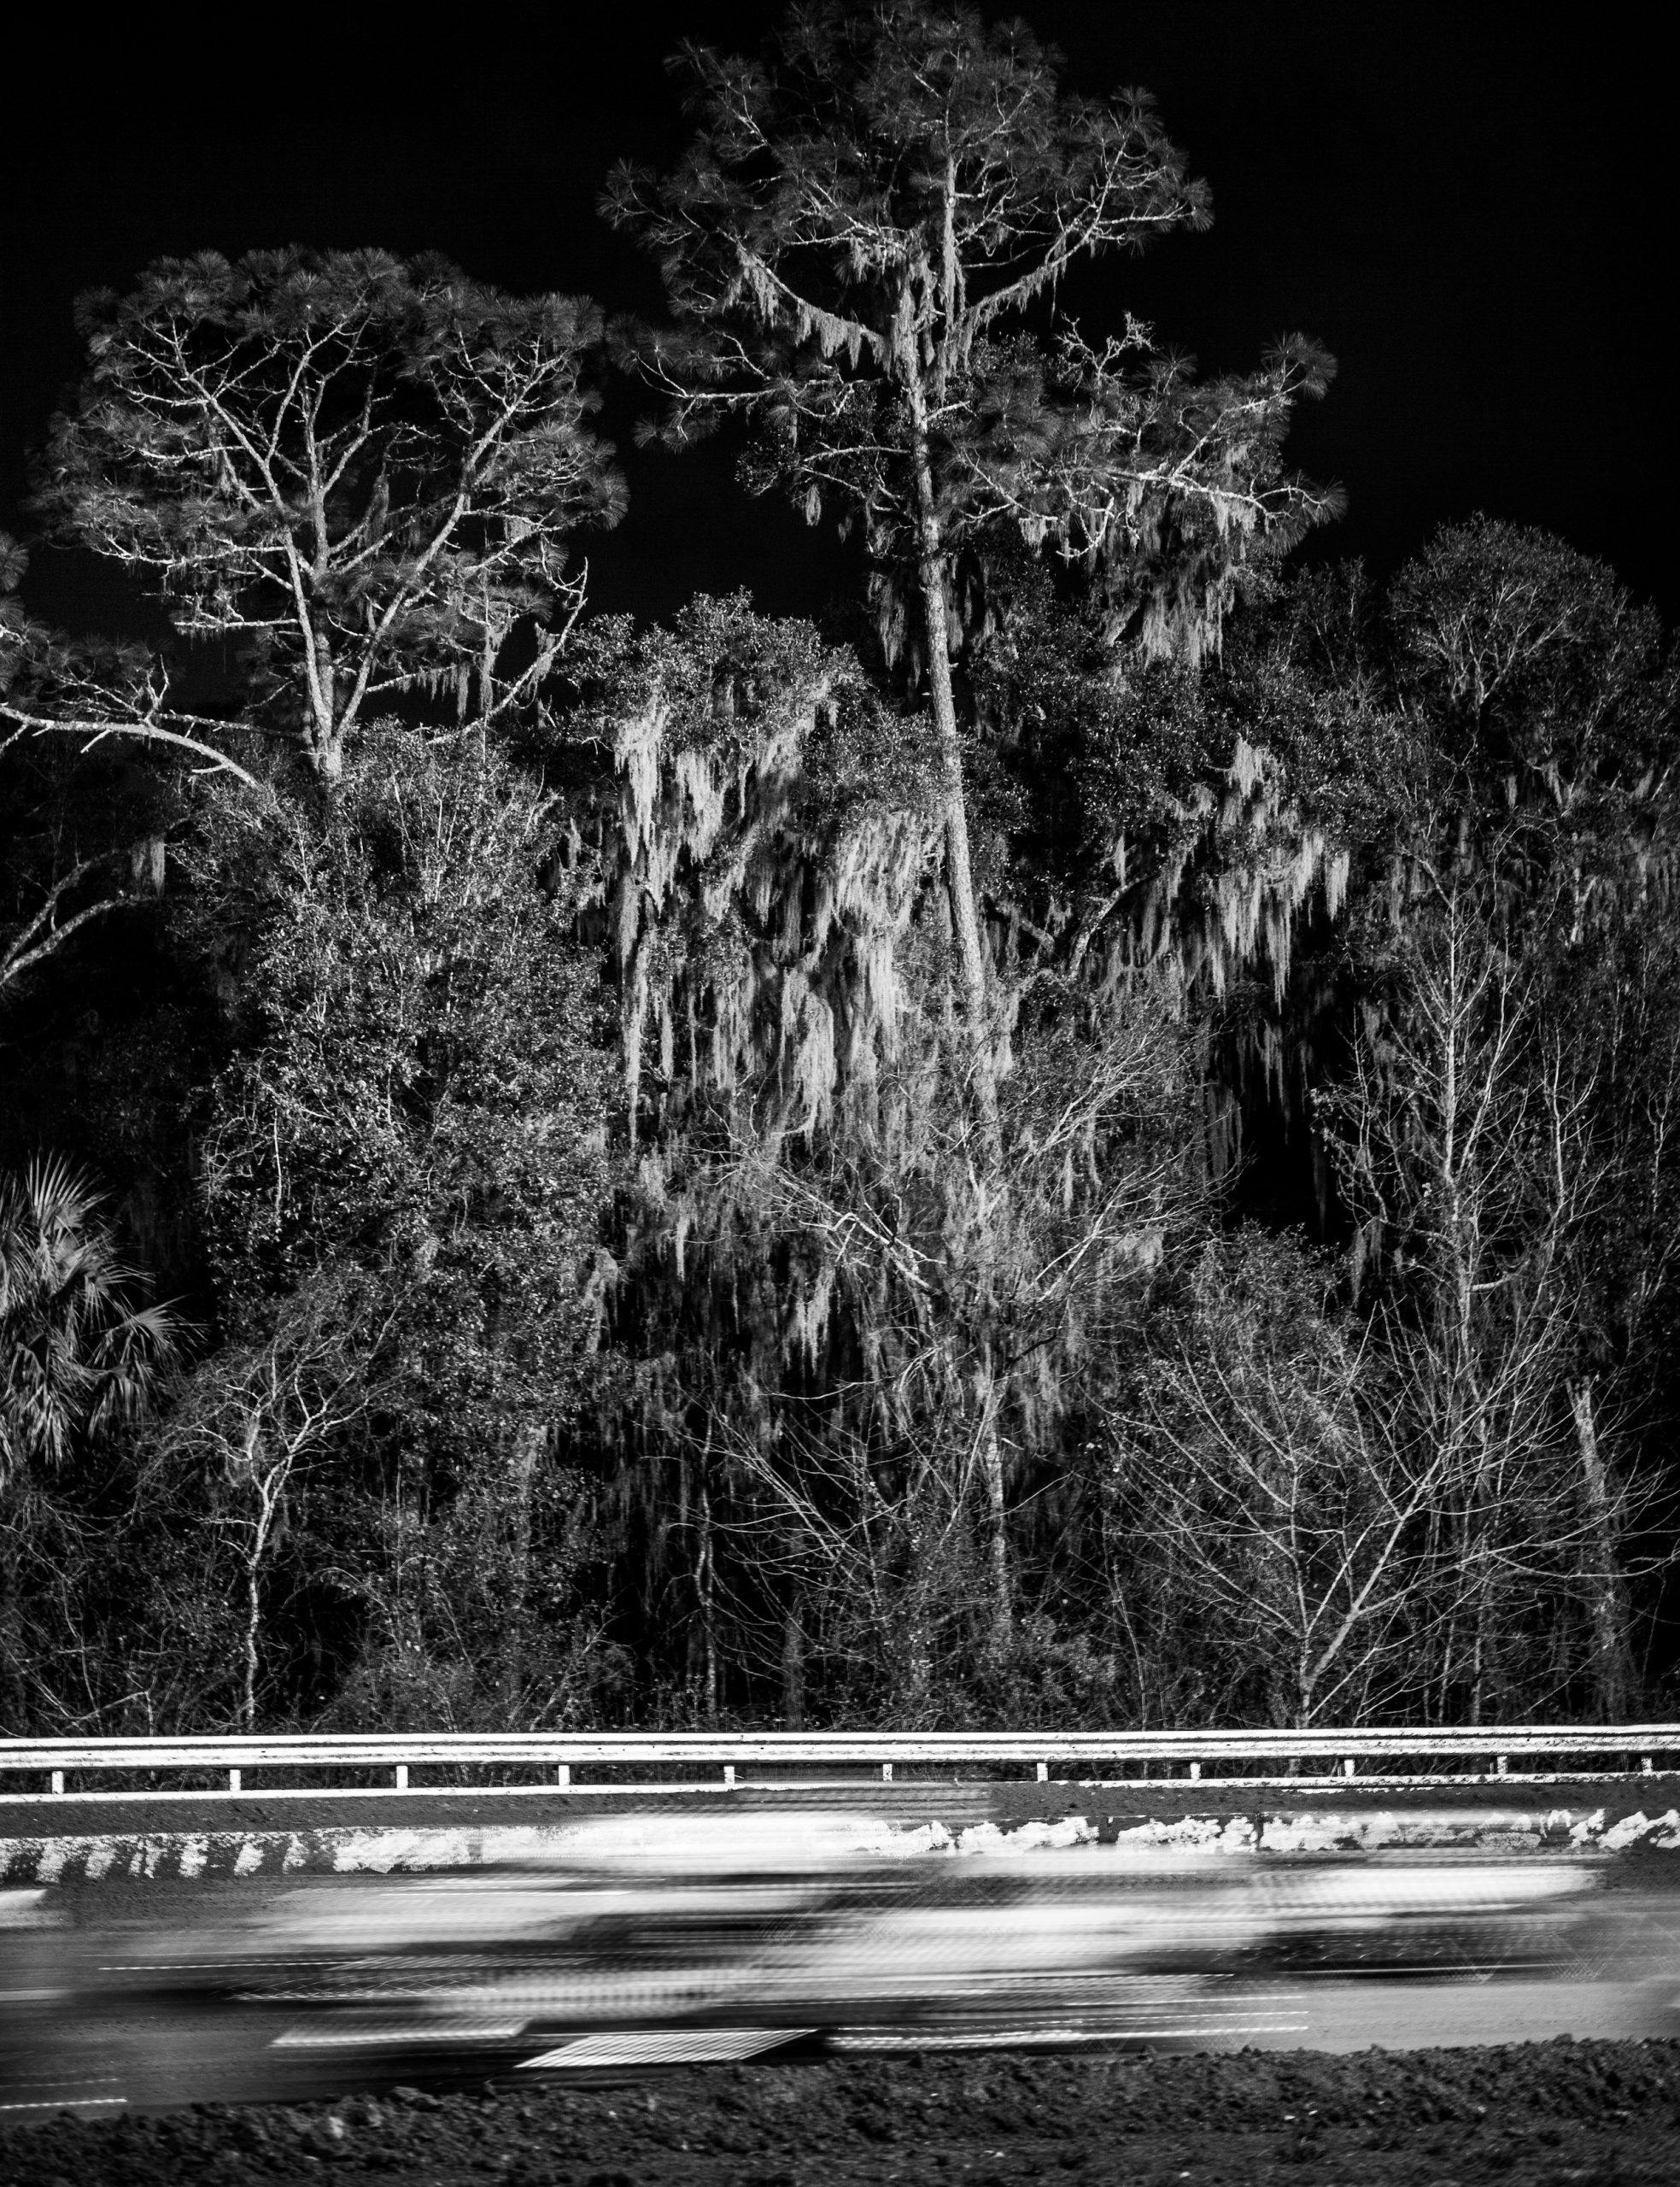 Grassroots racing blur action florida moss trees vertical black white